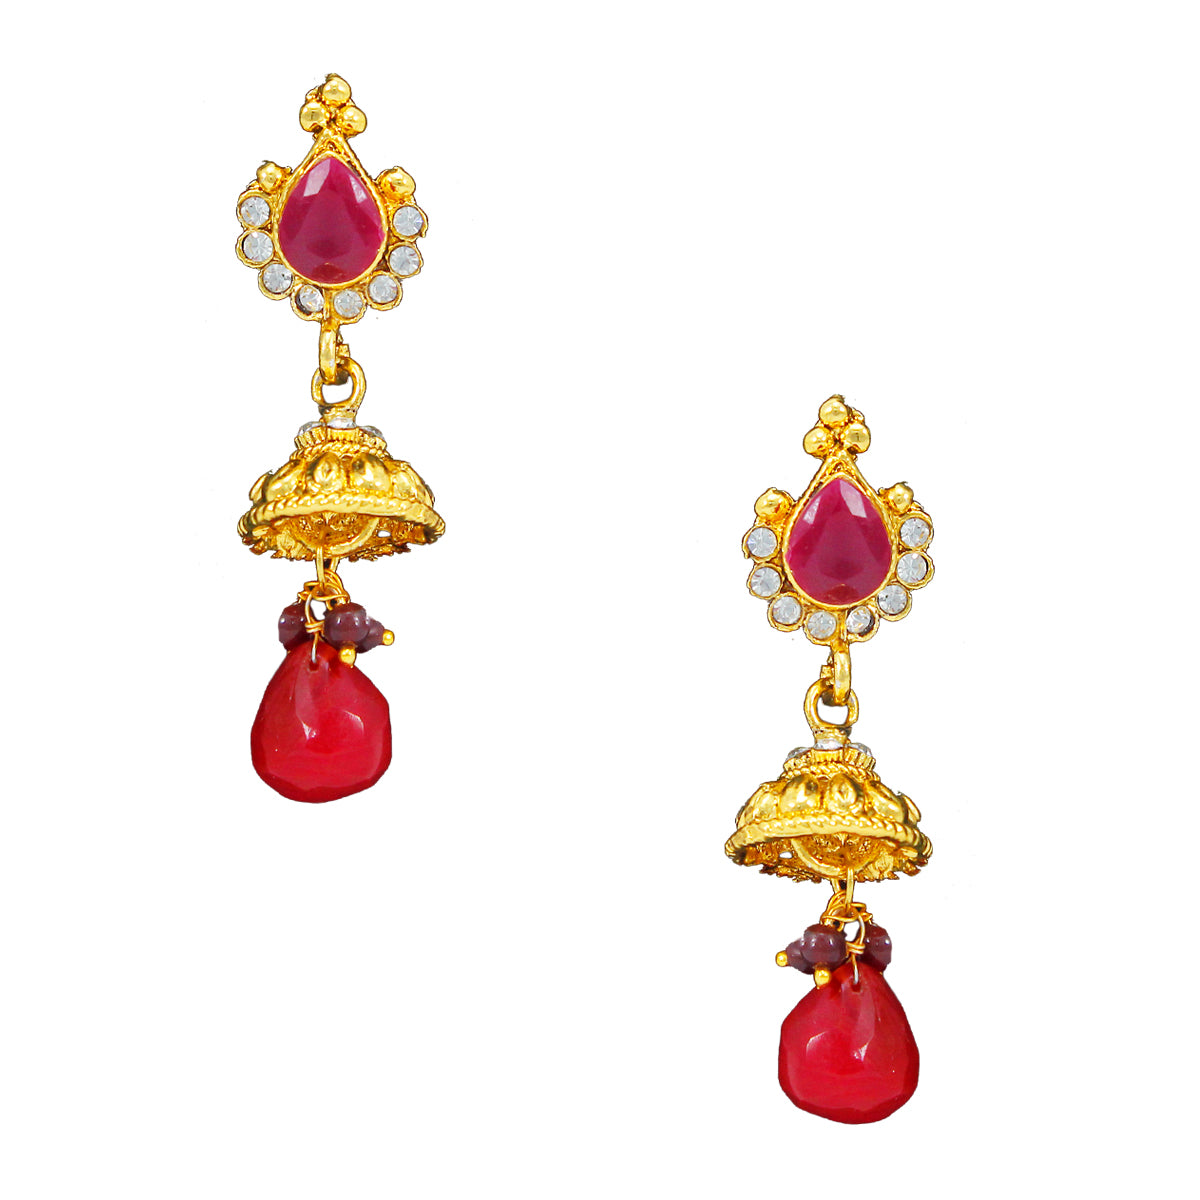 Royal Gold Plated Designer Kundan Stone Rani Har Design Necklace and  Jhumka Earrings with White  Red Stones and Pearl Chain